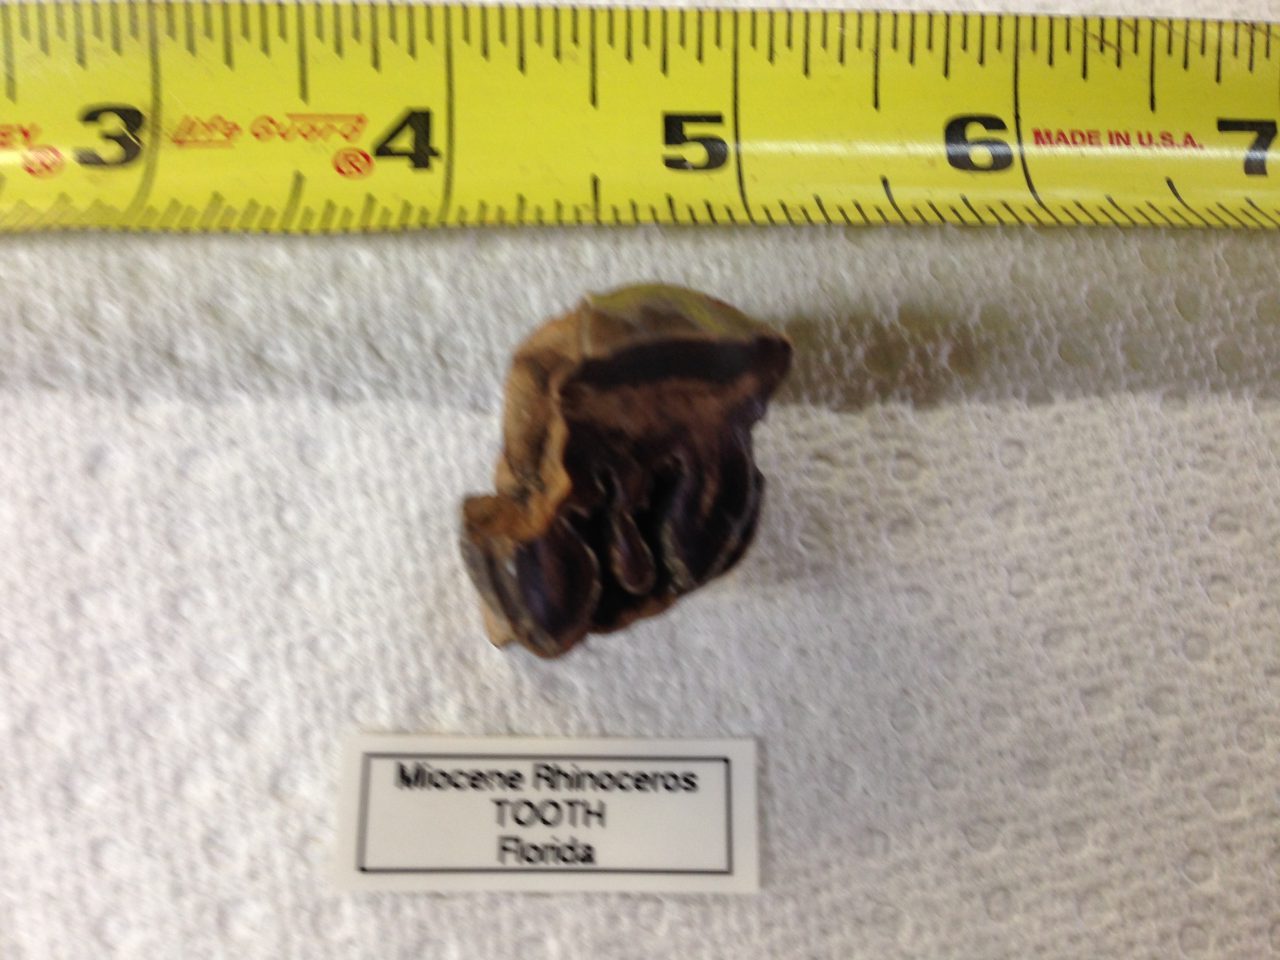 Rhinoceros Menoceras Barbouri Two Partial Teeth Fossil from Florida | Fossils & Artifacts for Sale | Paleo Enterprises | Fossils & Artifacts for Sale